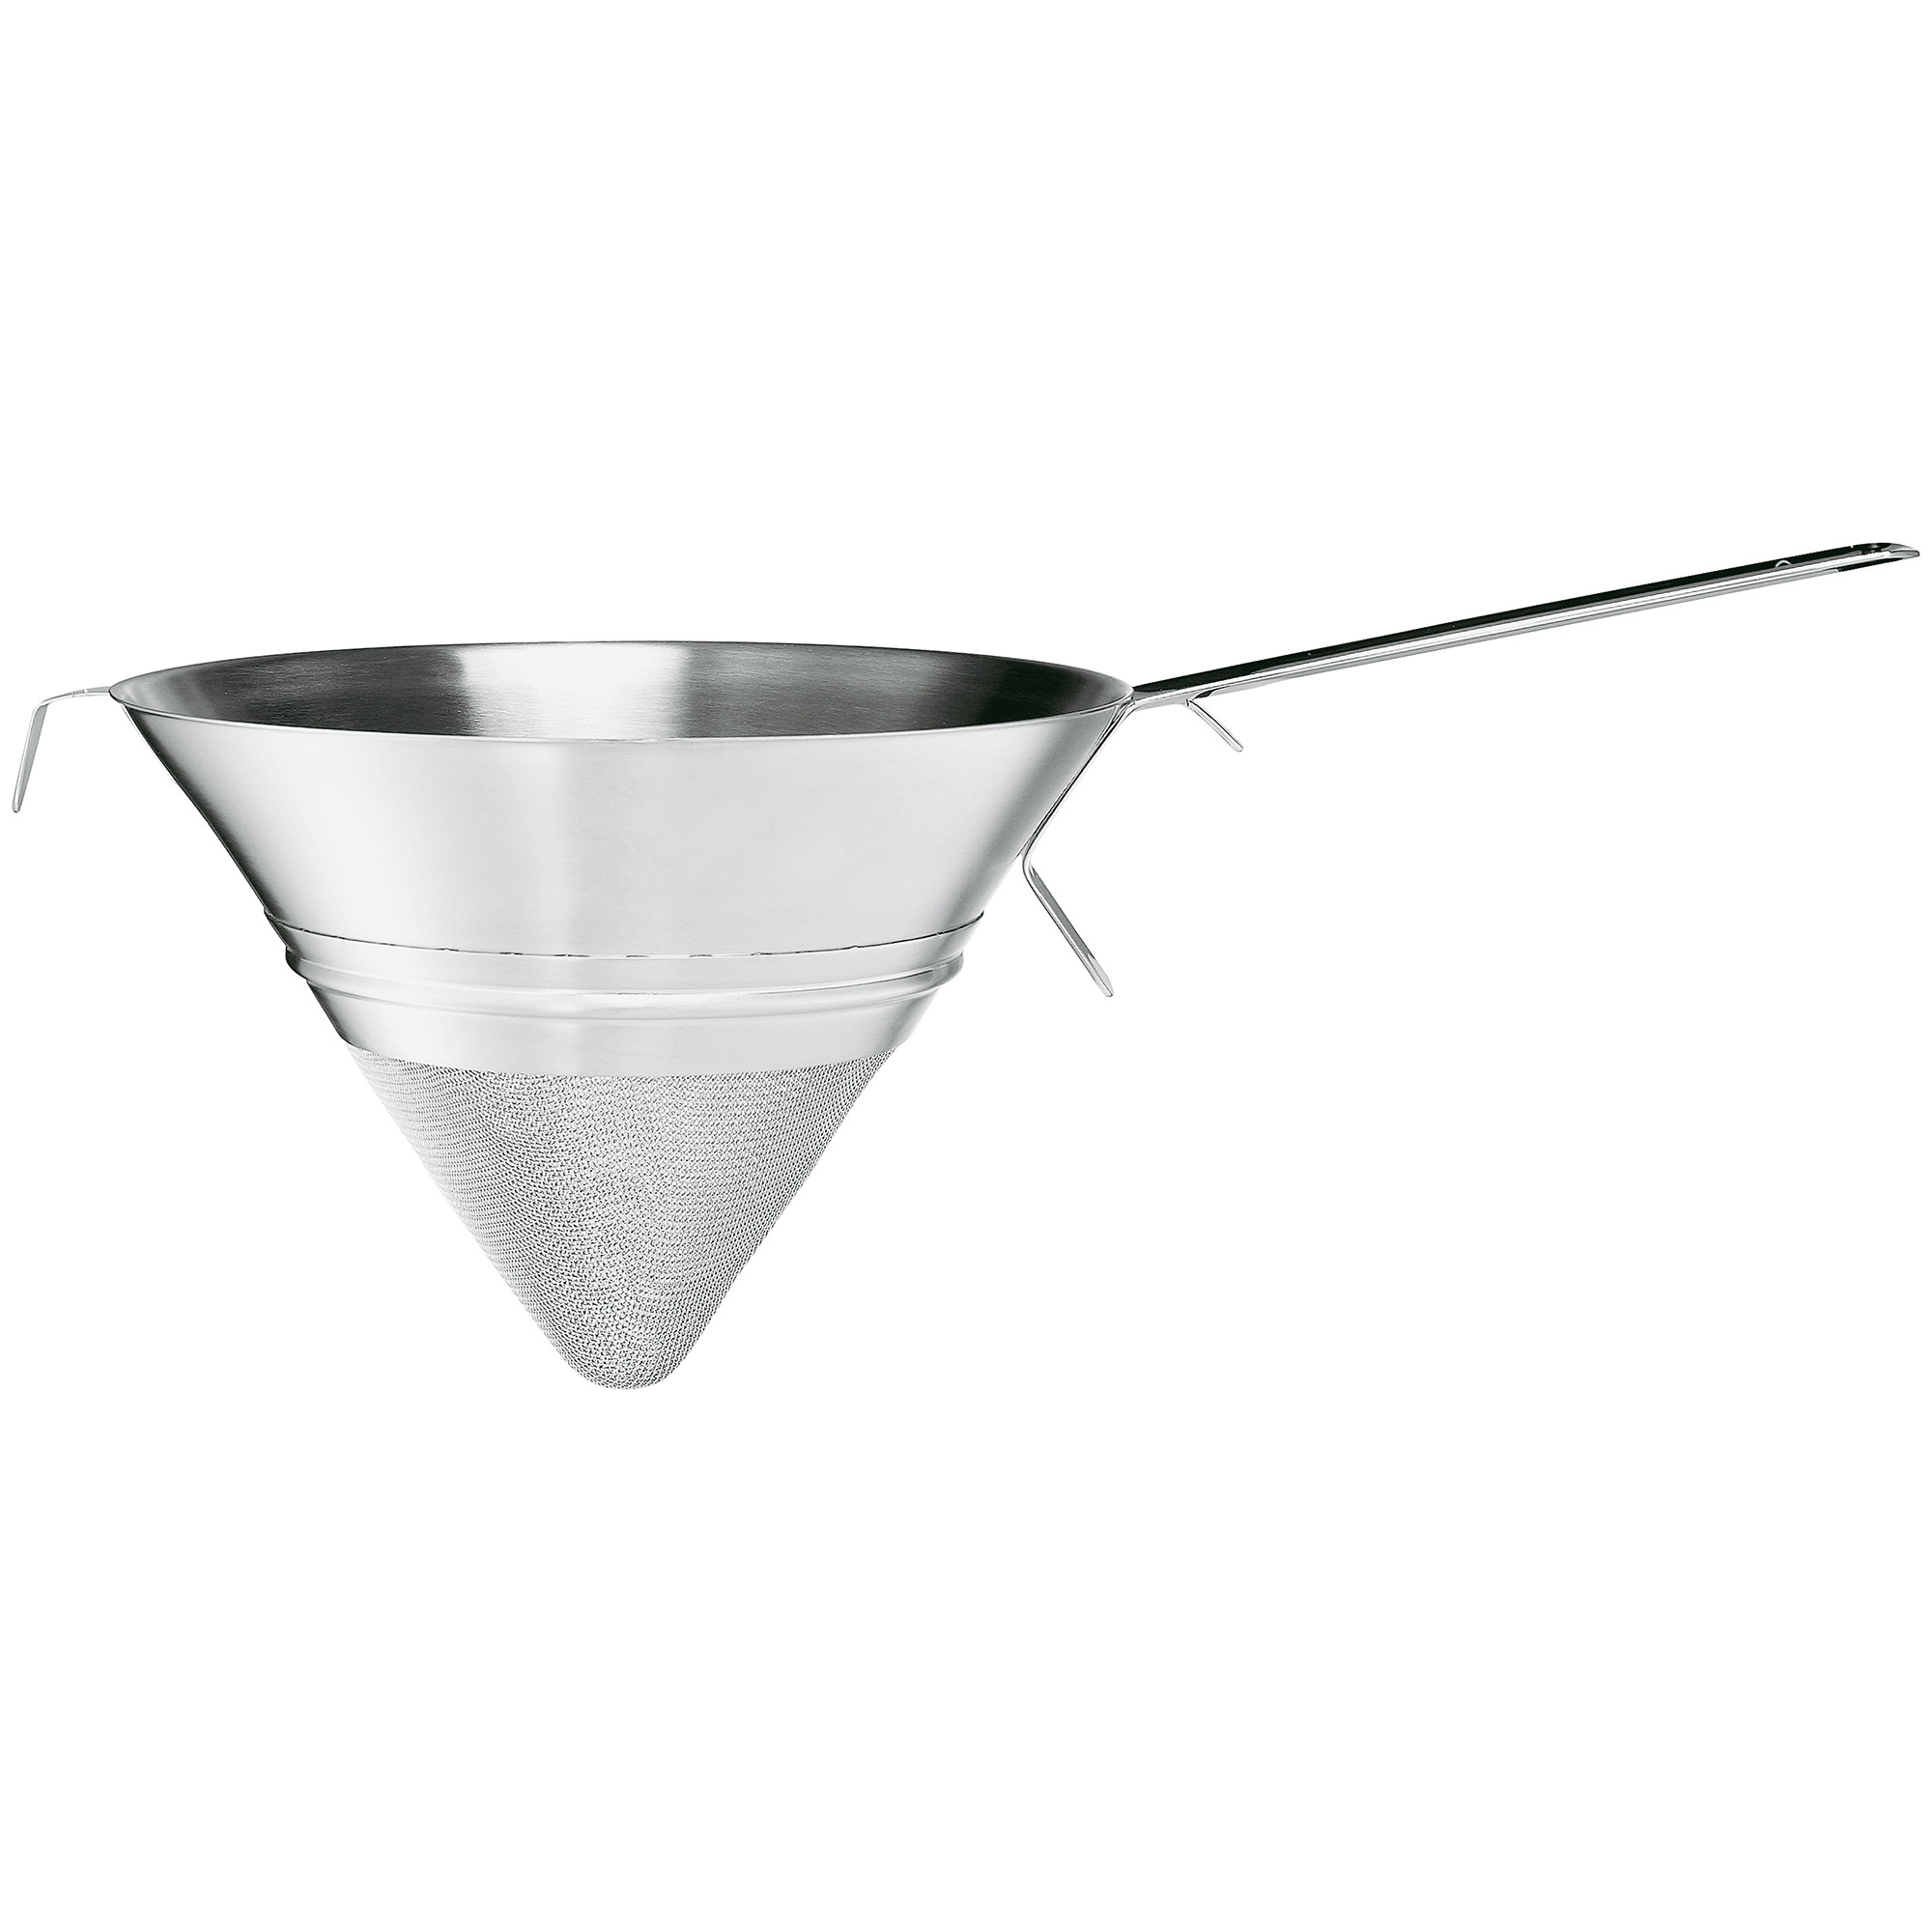 Stainless Steel Conical Vegetable Strainer, 9.25 Qt